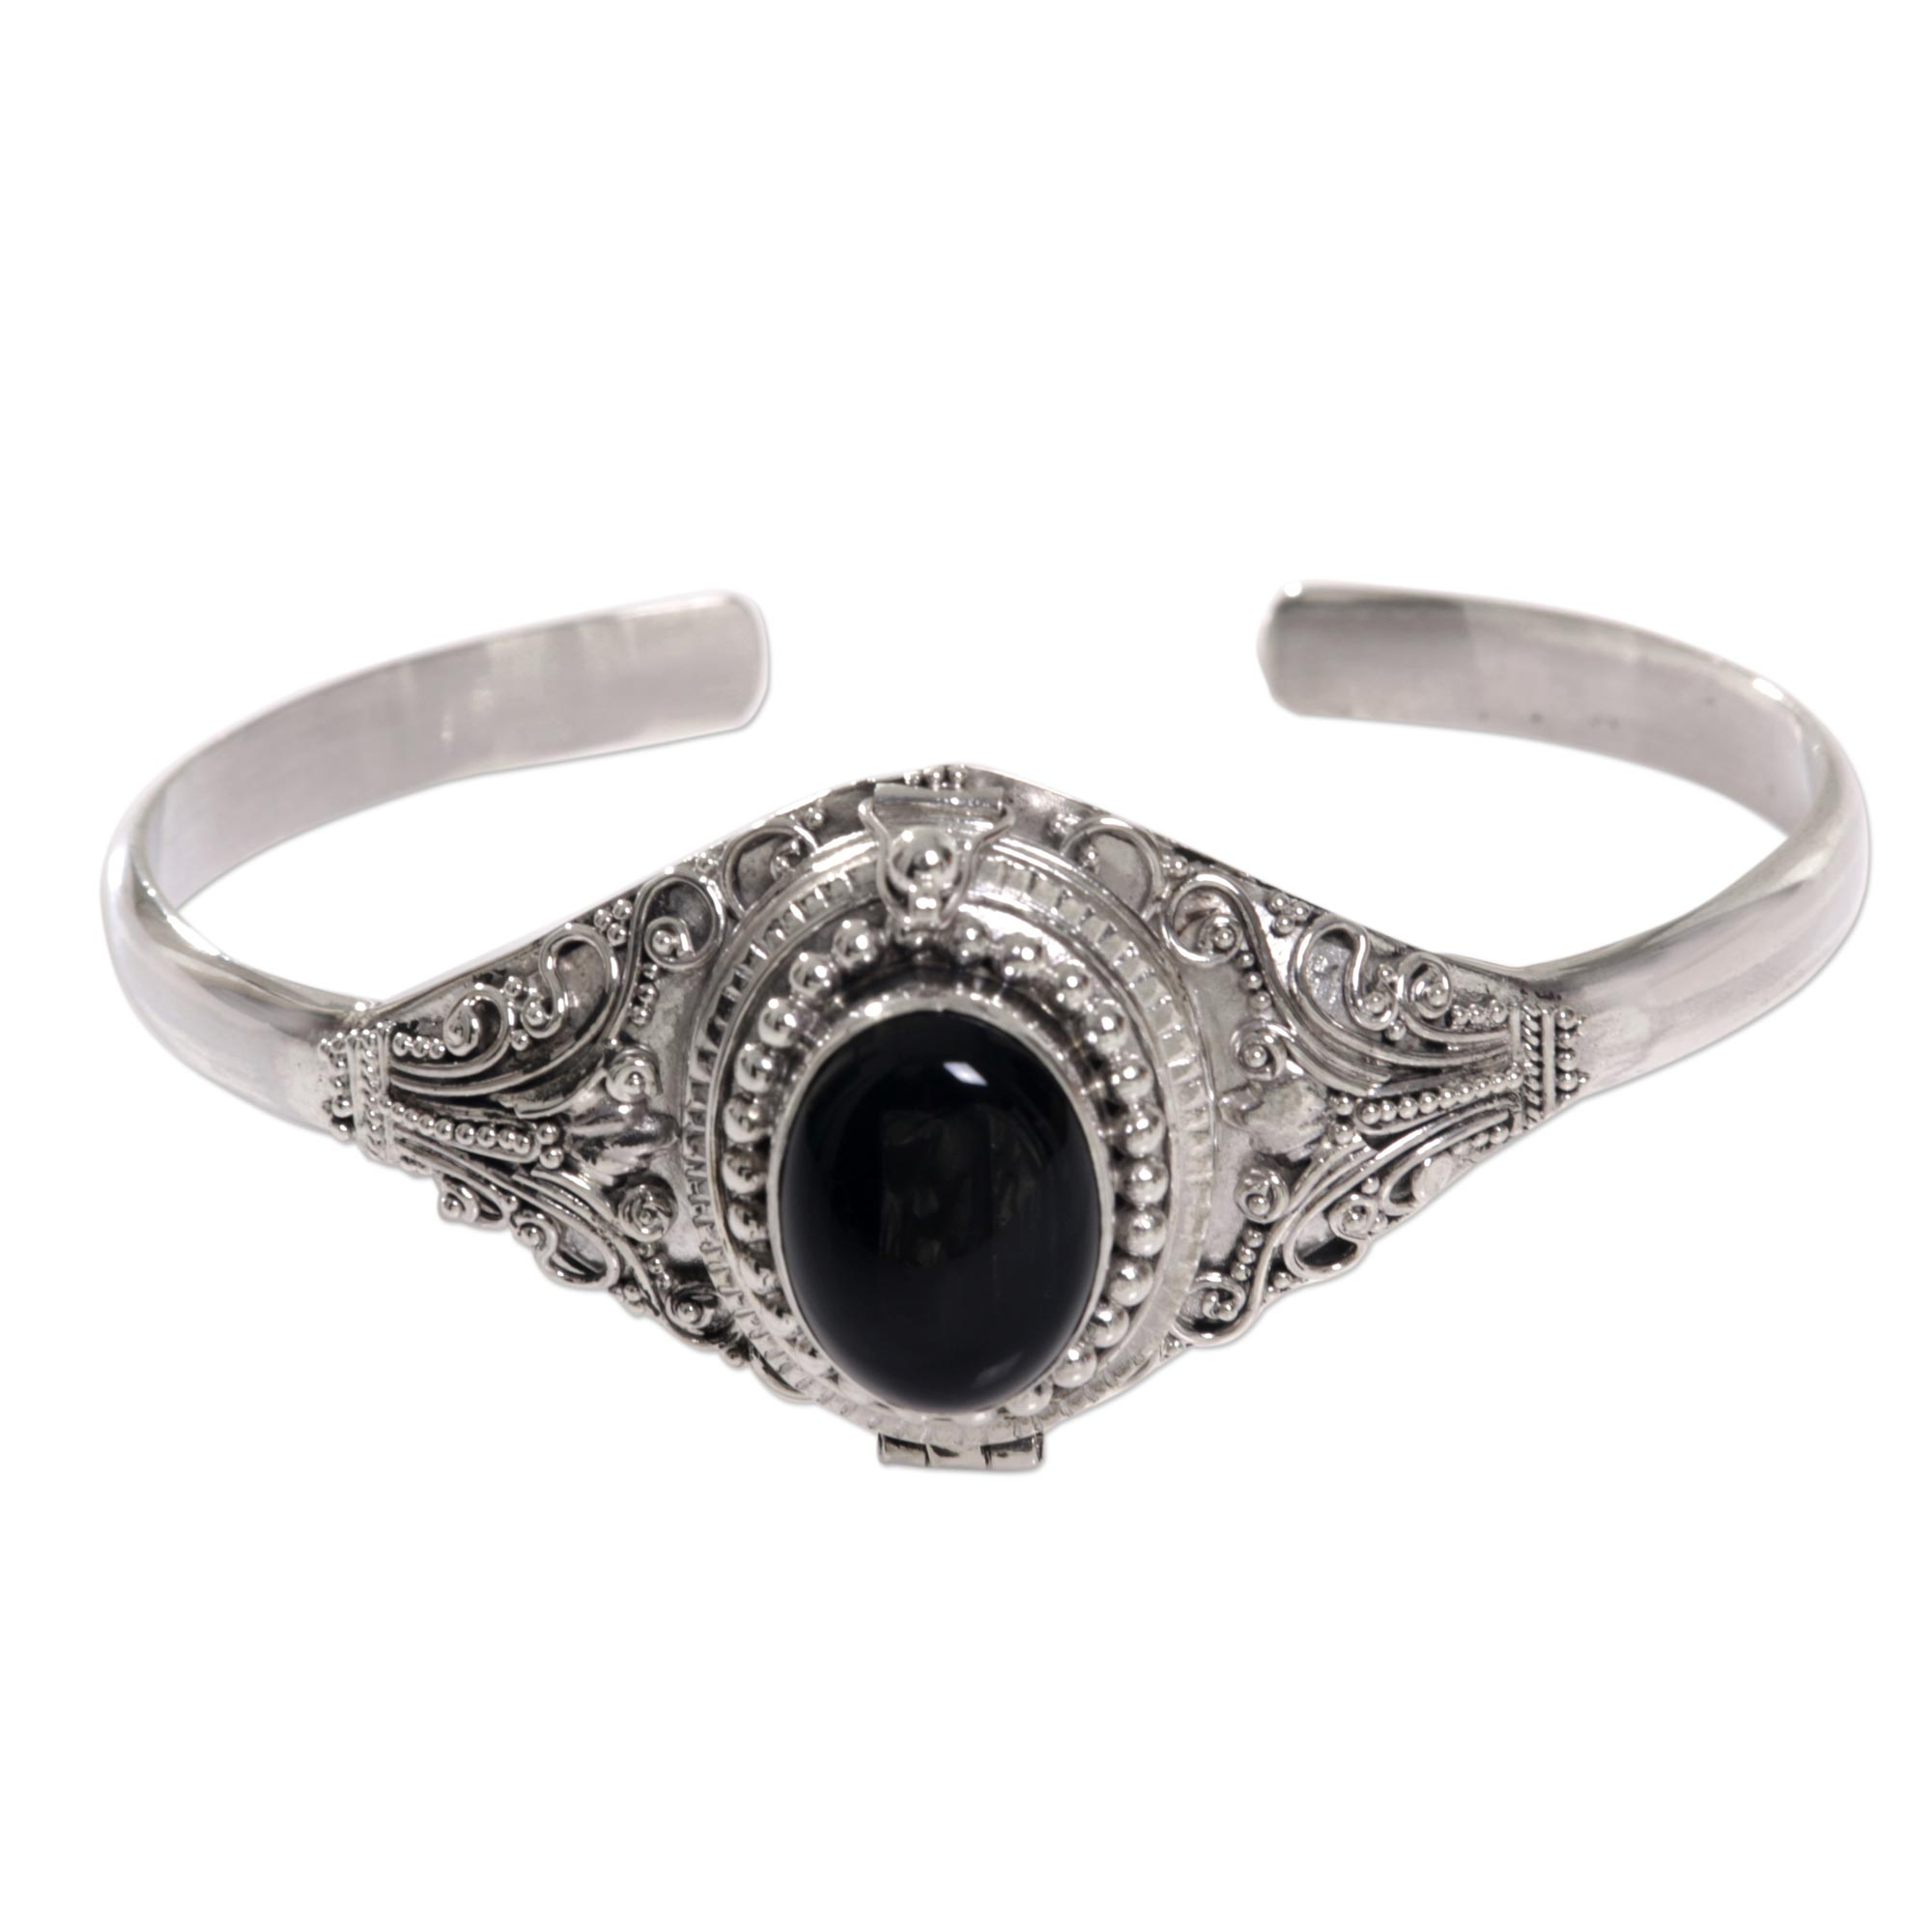 Onyx and Sterling Silver Cuff Locket Bracelet Indonesia - Deep